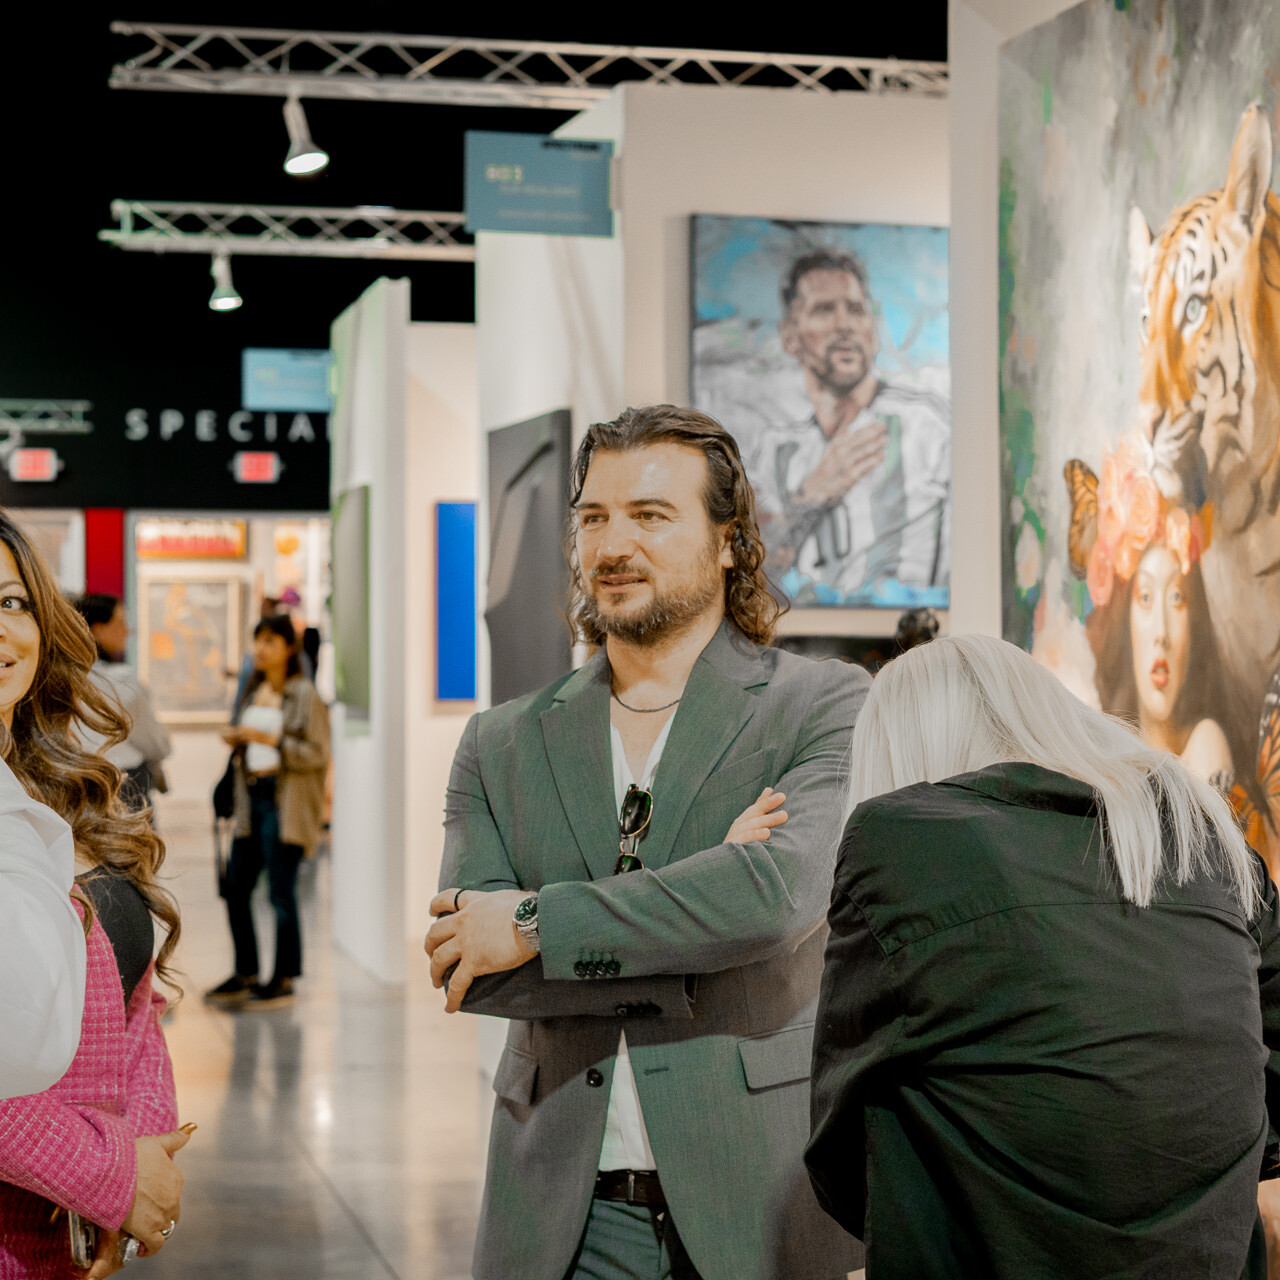 Artist Alex Righetto is engaged in a lively discussion with attendees at Miami Art Week, with the striking painting 'The Guardian' in the background.